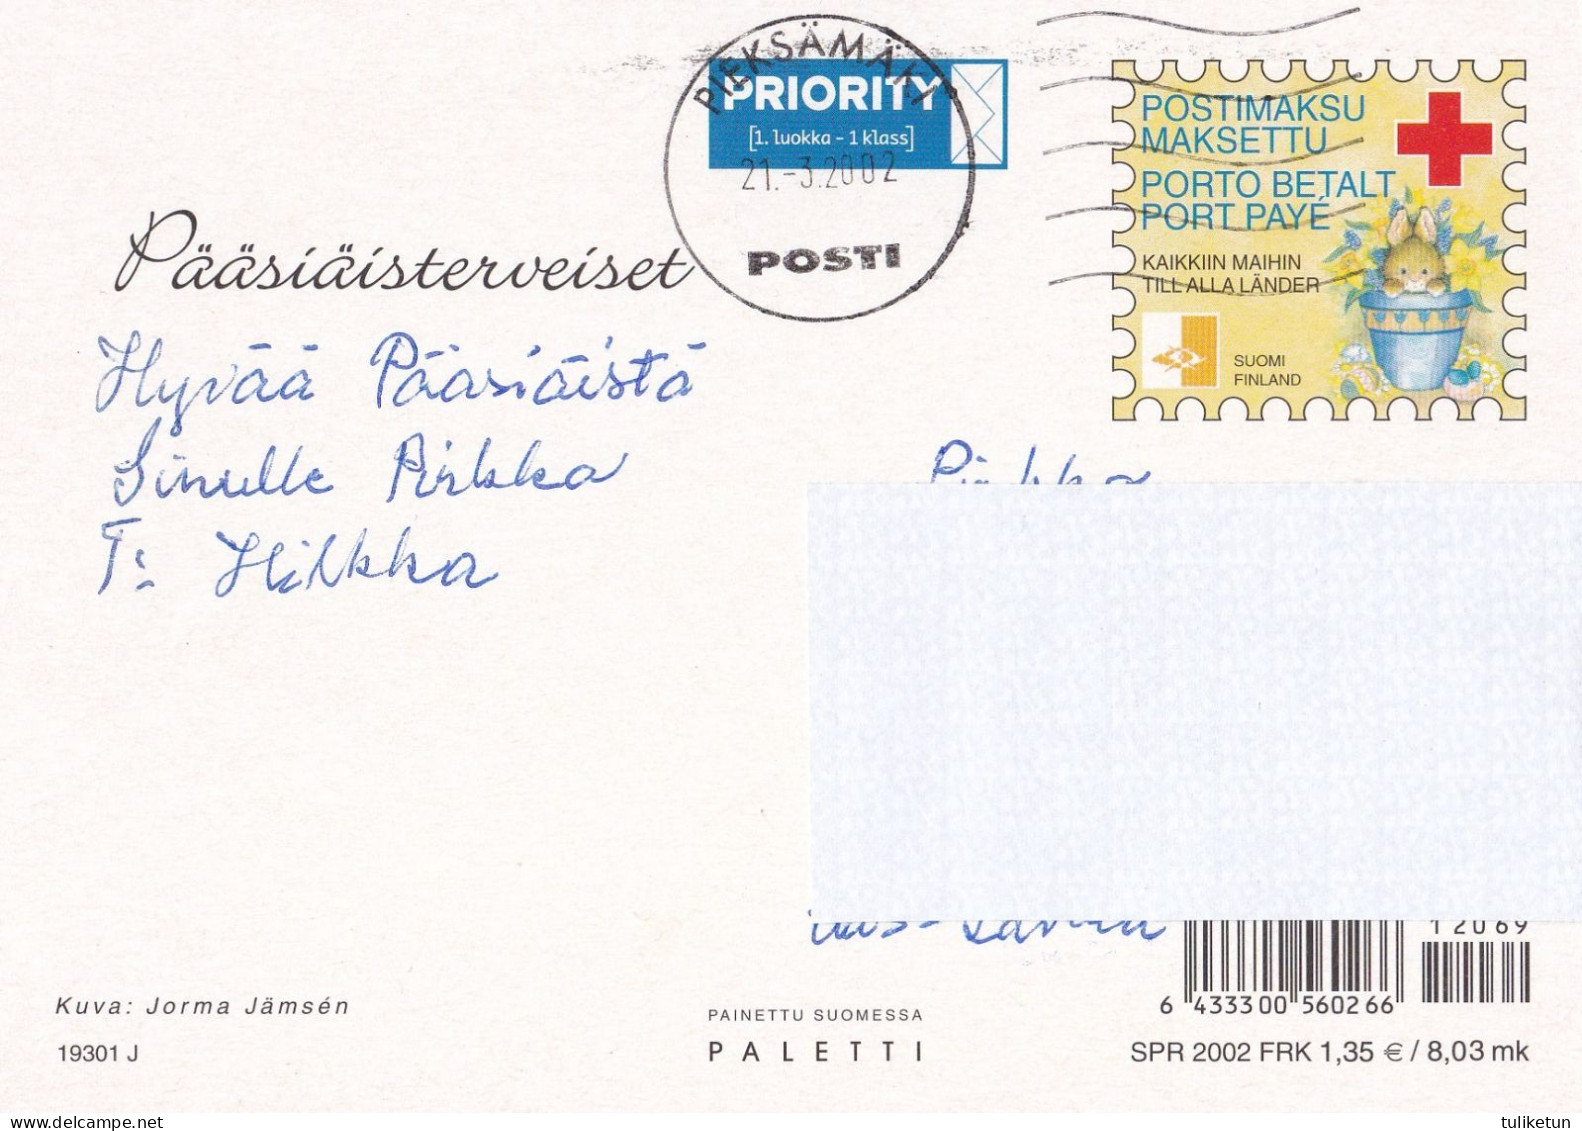 Postal Stationery - Easter Flowers - Tulips - Willows - Eggs - Red Cross 2003 - Suomi Finland - Postage Paid - Postal Stationery